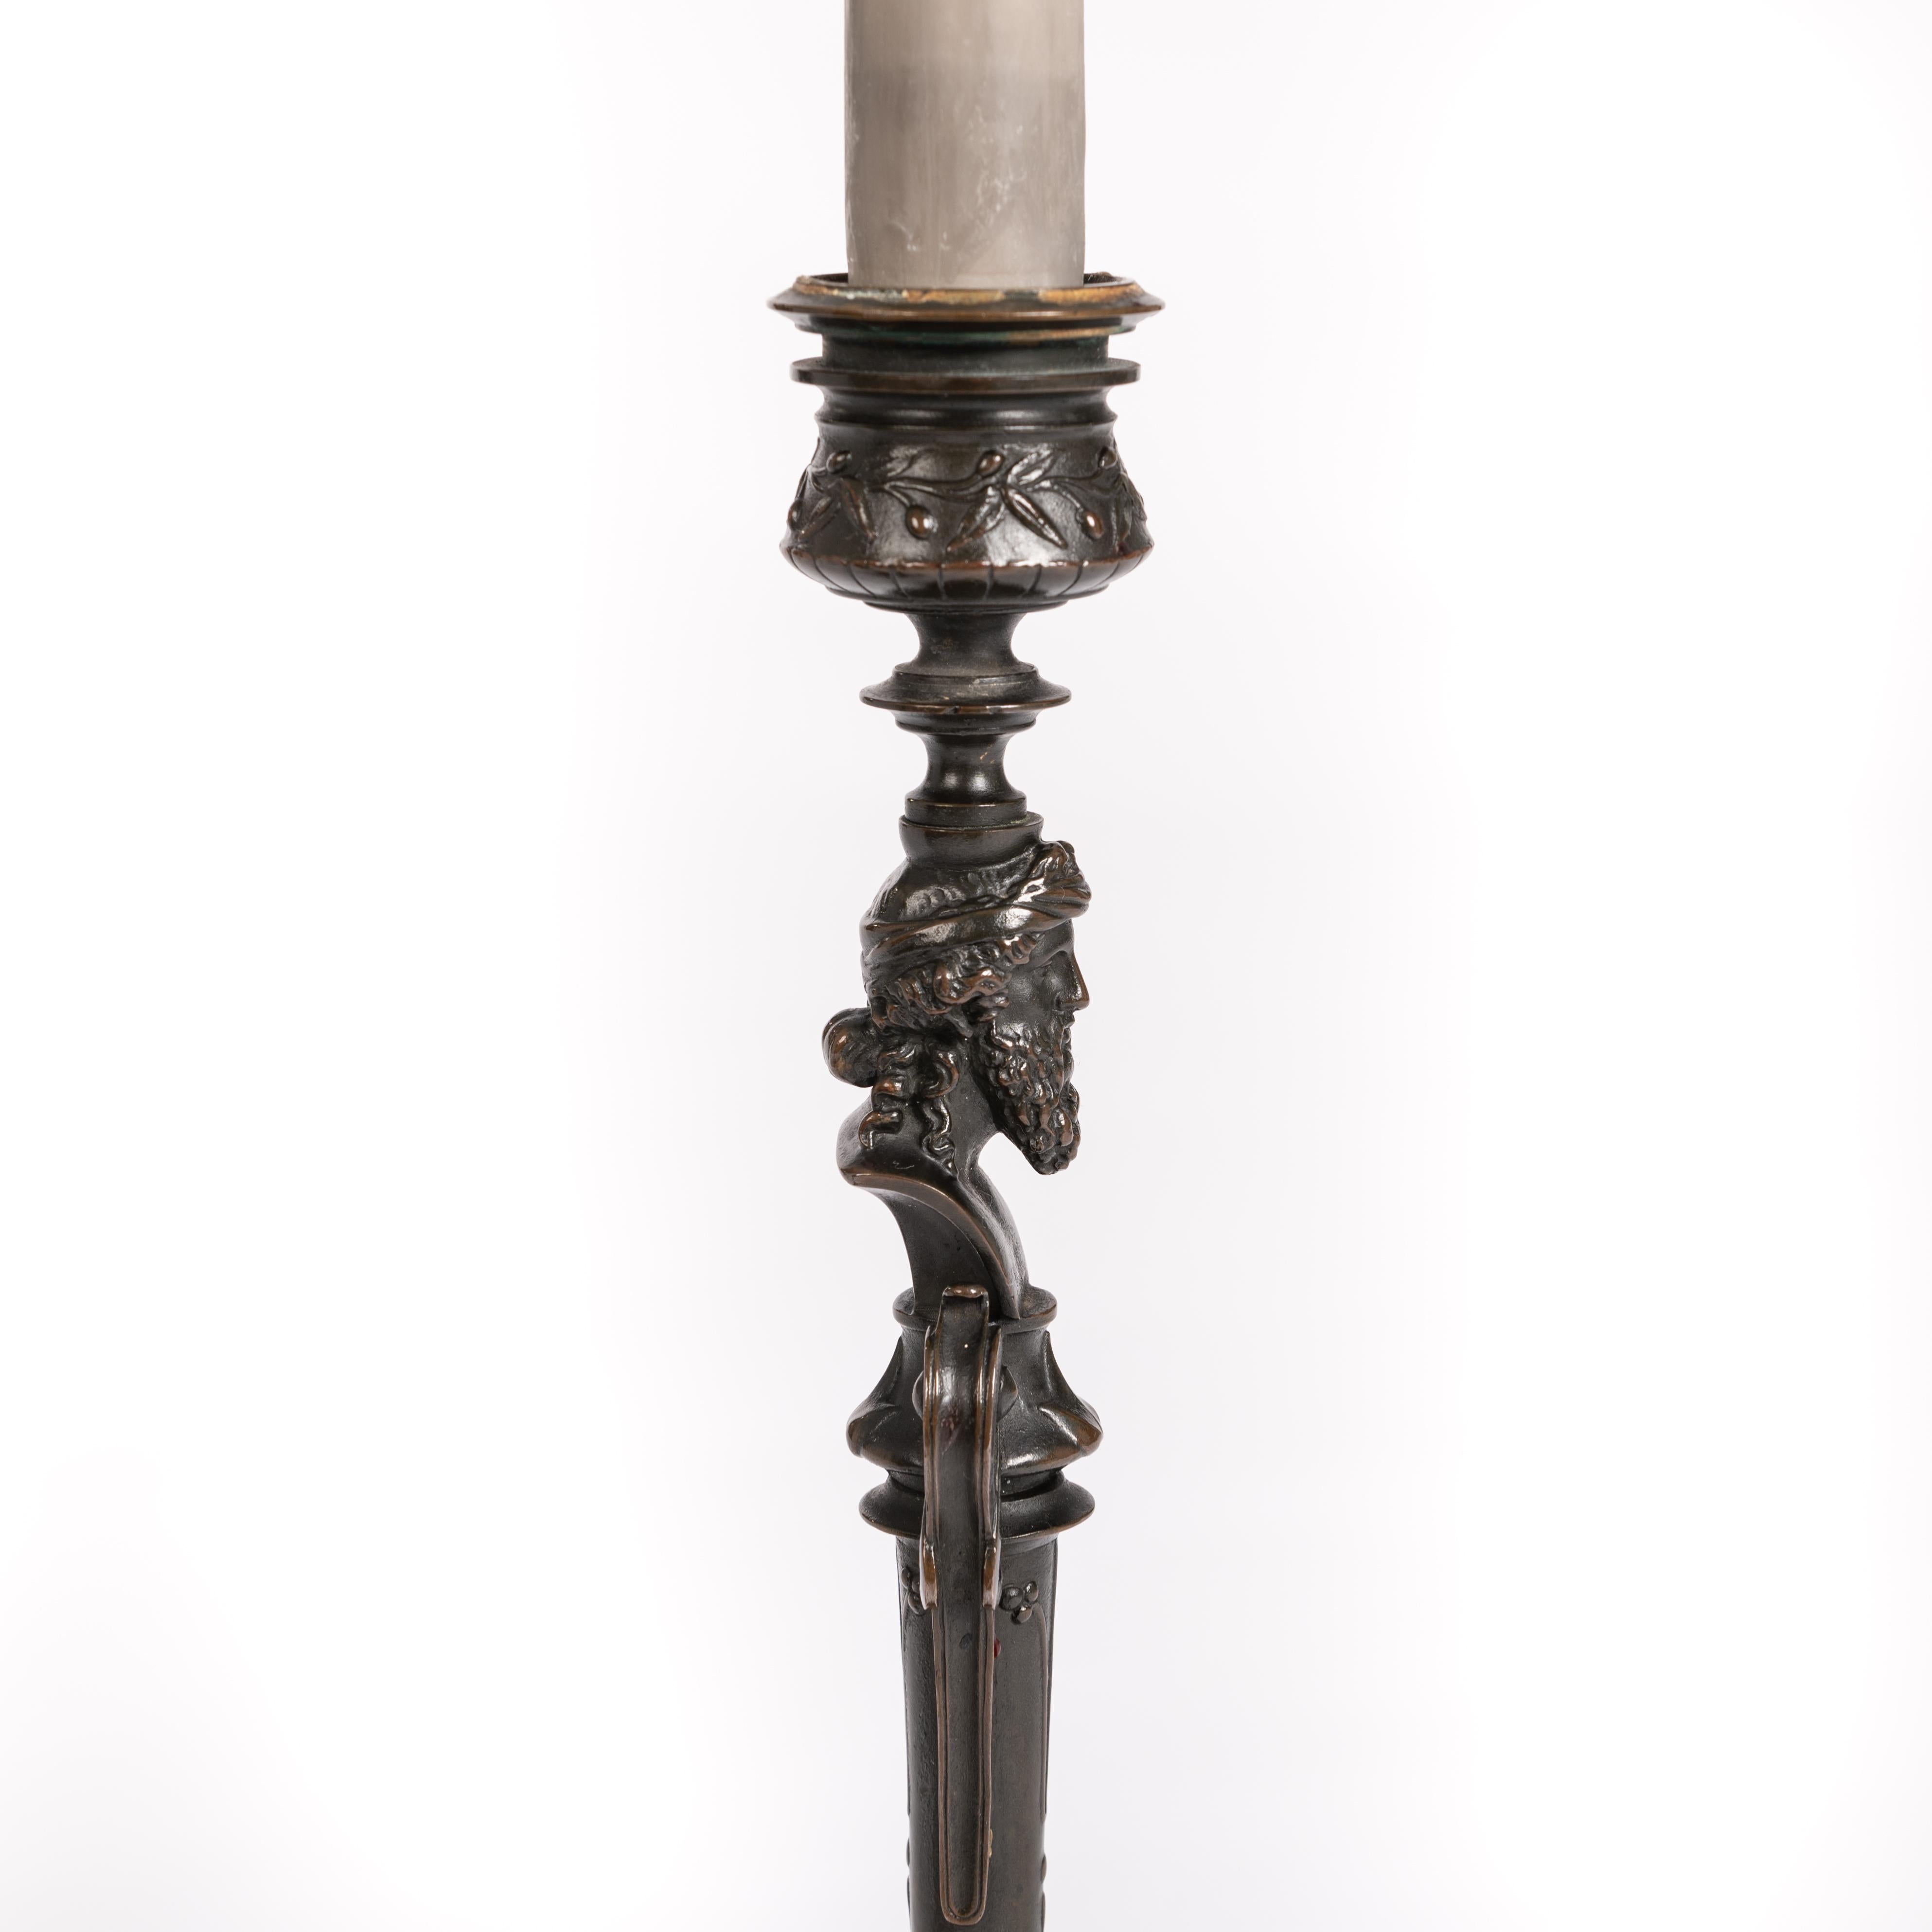 Pair of French Napoleon III Bronze Candlesticks by Foundry F. Barbedienne 1860s For Sale 2